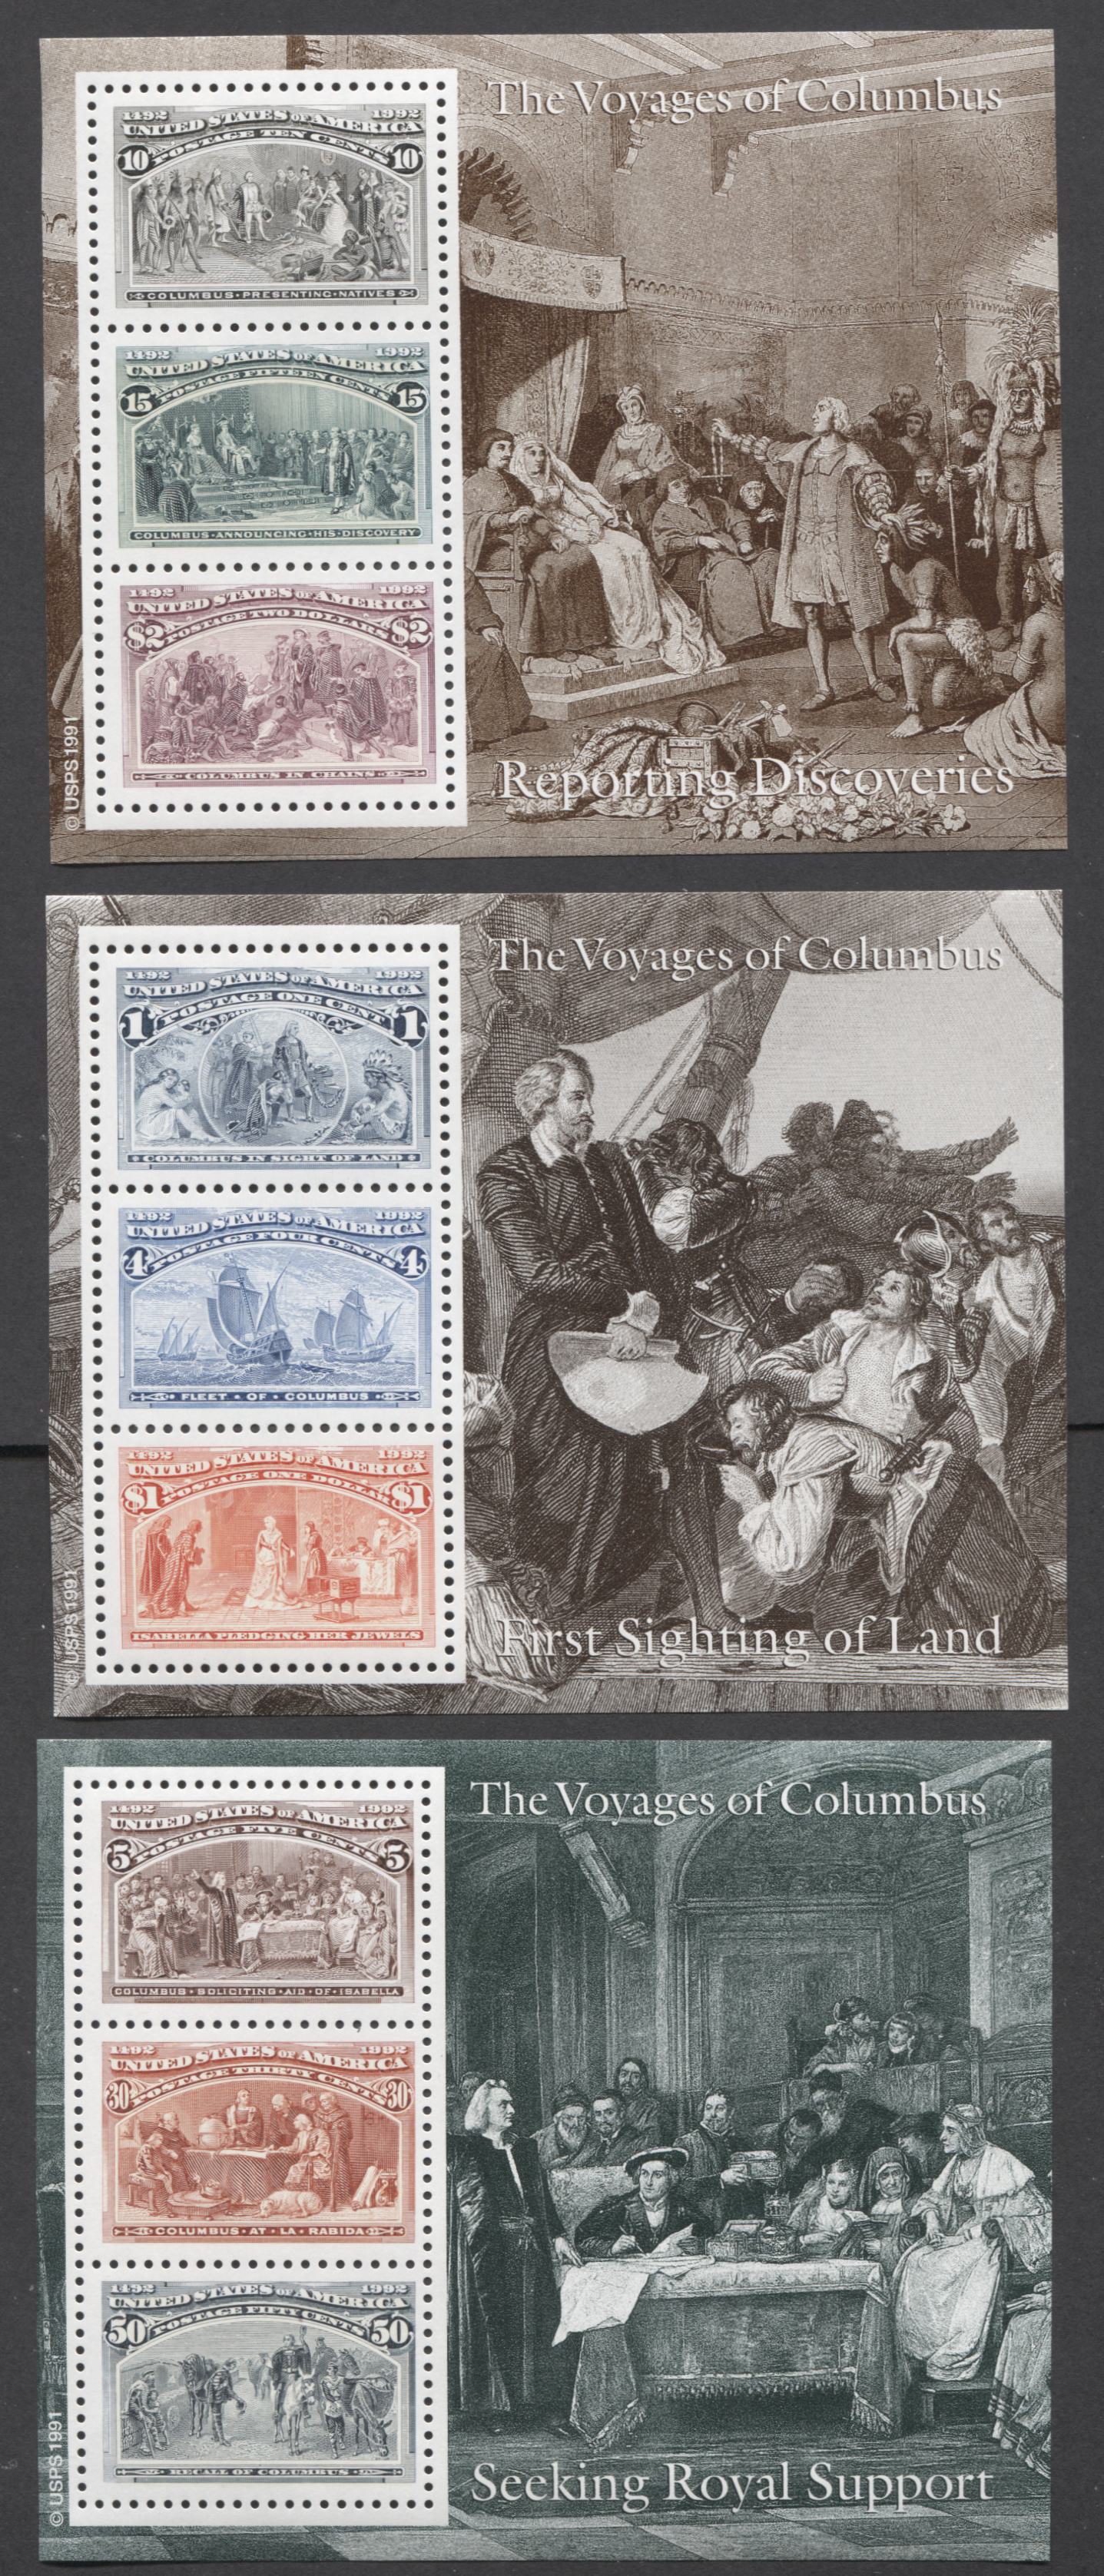 Lot 45 United States SC#2624-2629 1992 Columbus Voyager Issue, In Set, 6 VFNH Souvenir Sheets, Click on Listing to See ALL Pictures, 2017 Scott Cat. $20.5